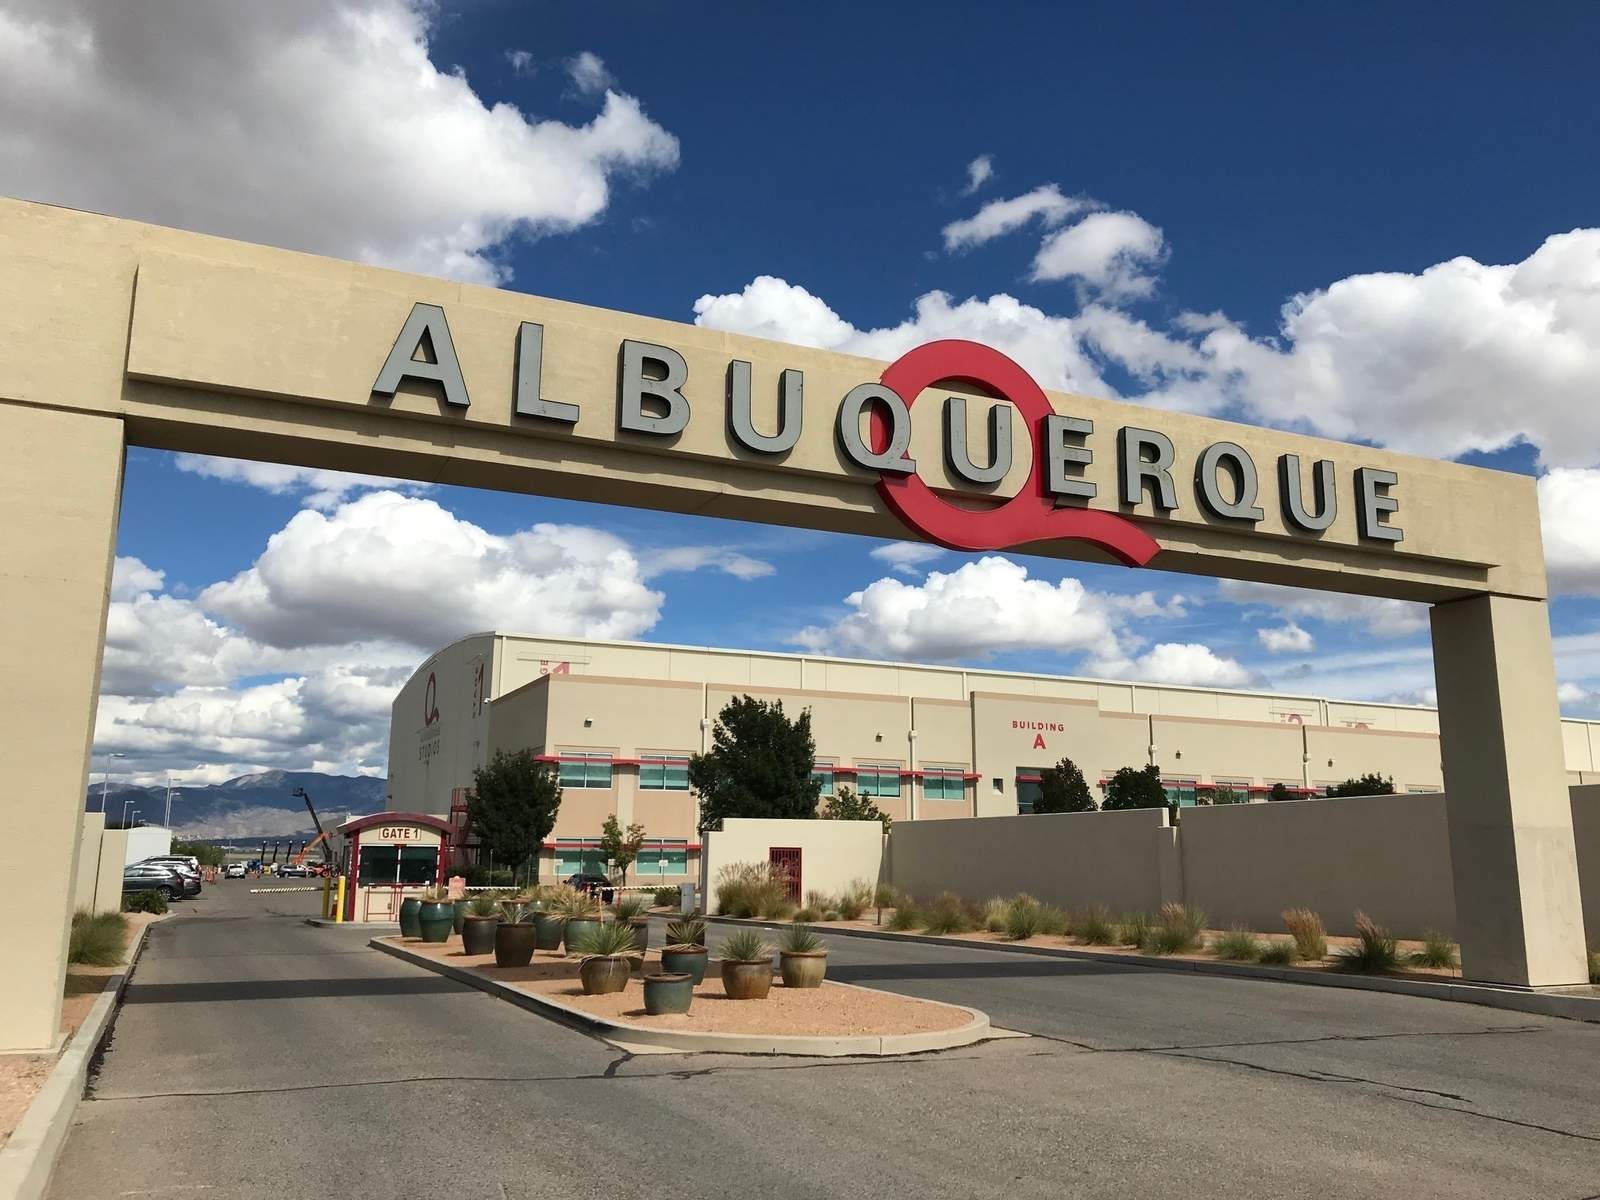 Netflix to expand production hub in New Mexico